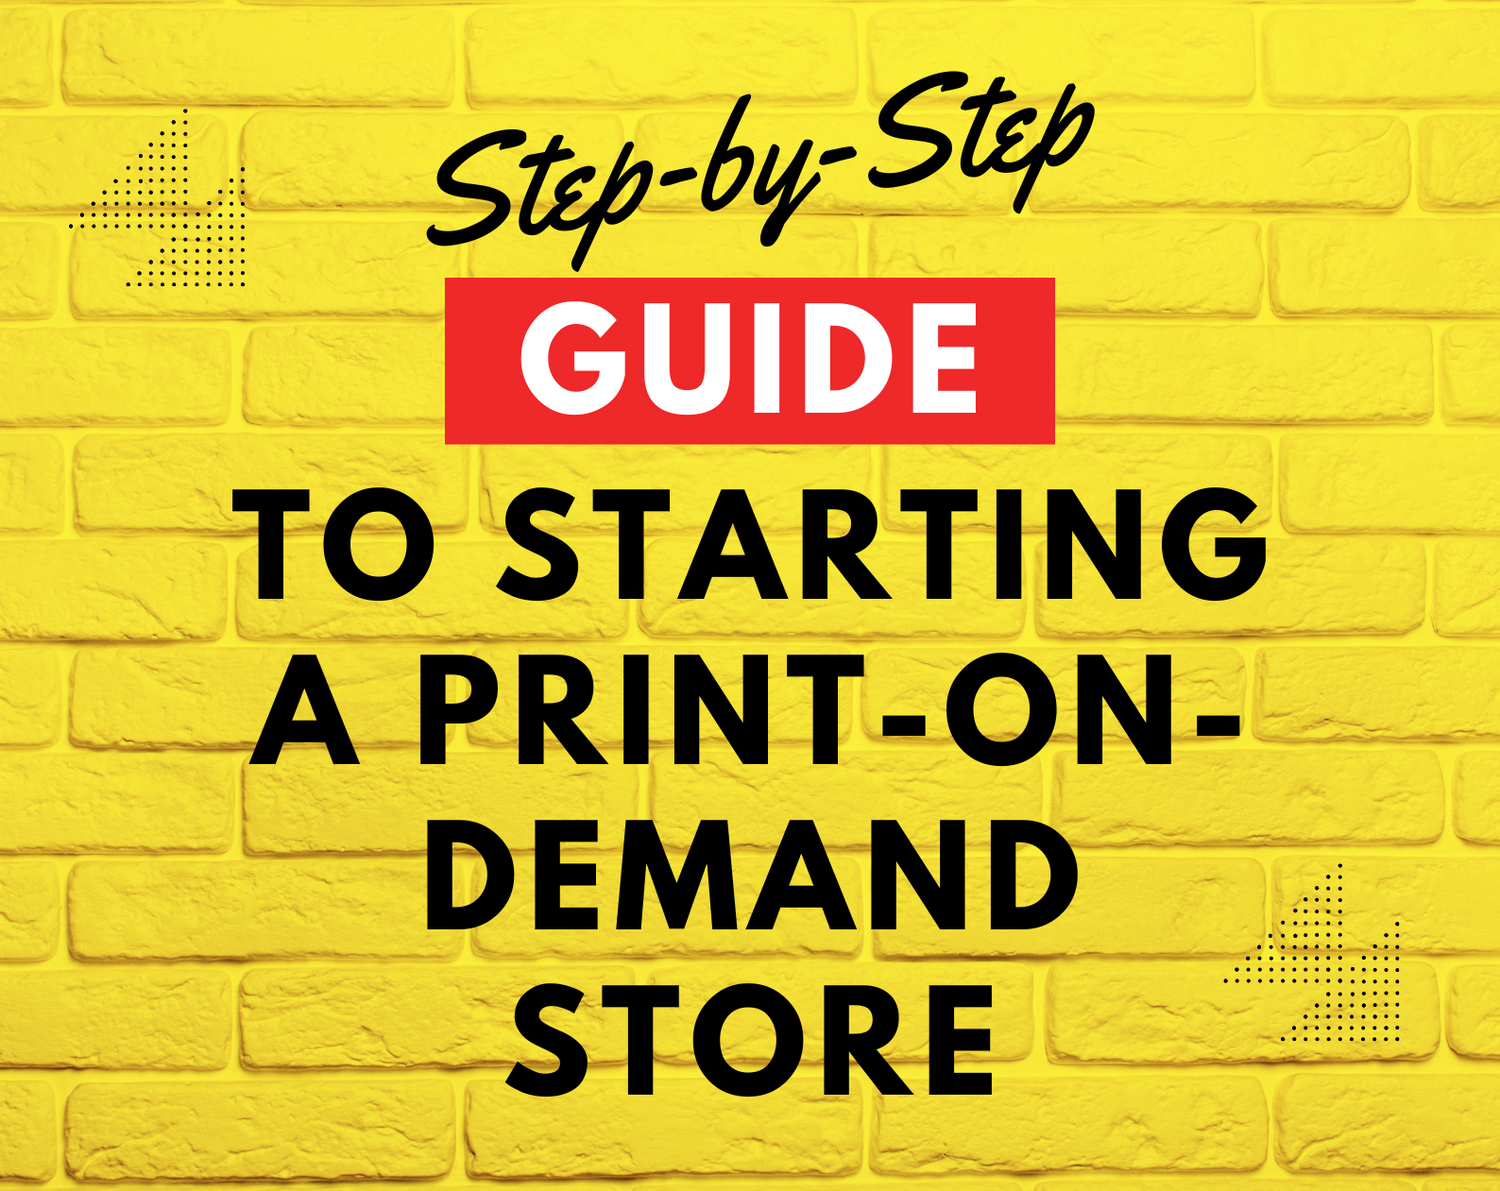 A Step-by-Step Guide to Starting a Print-on-Demand Store